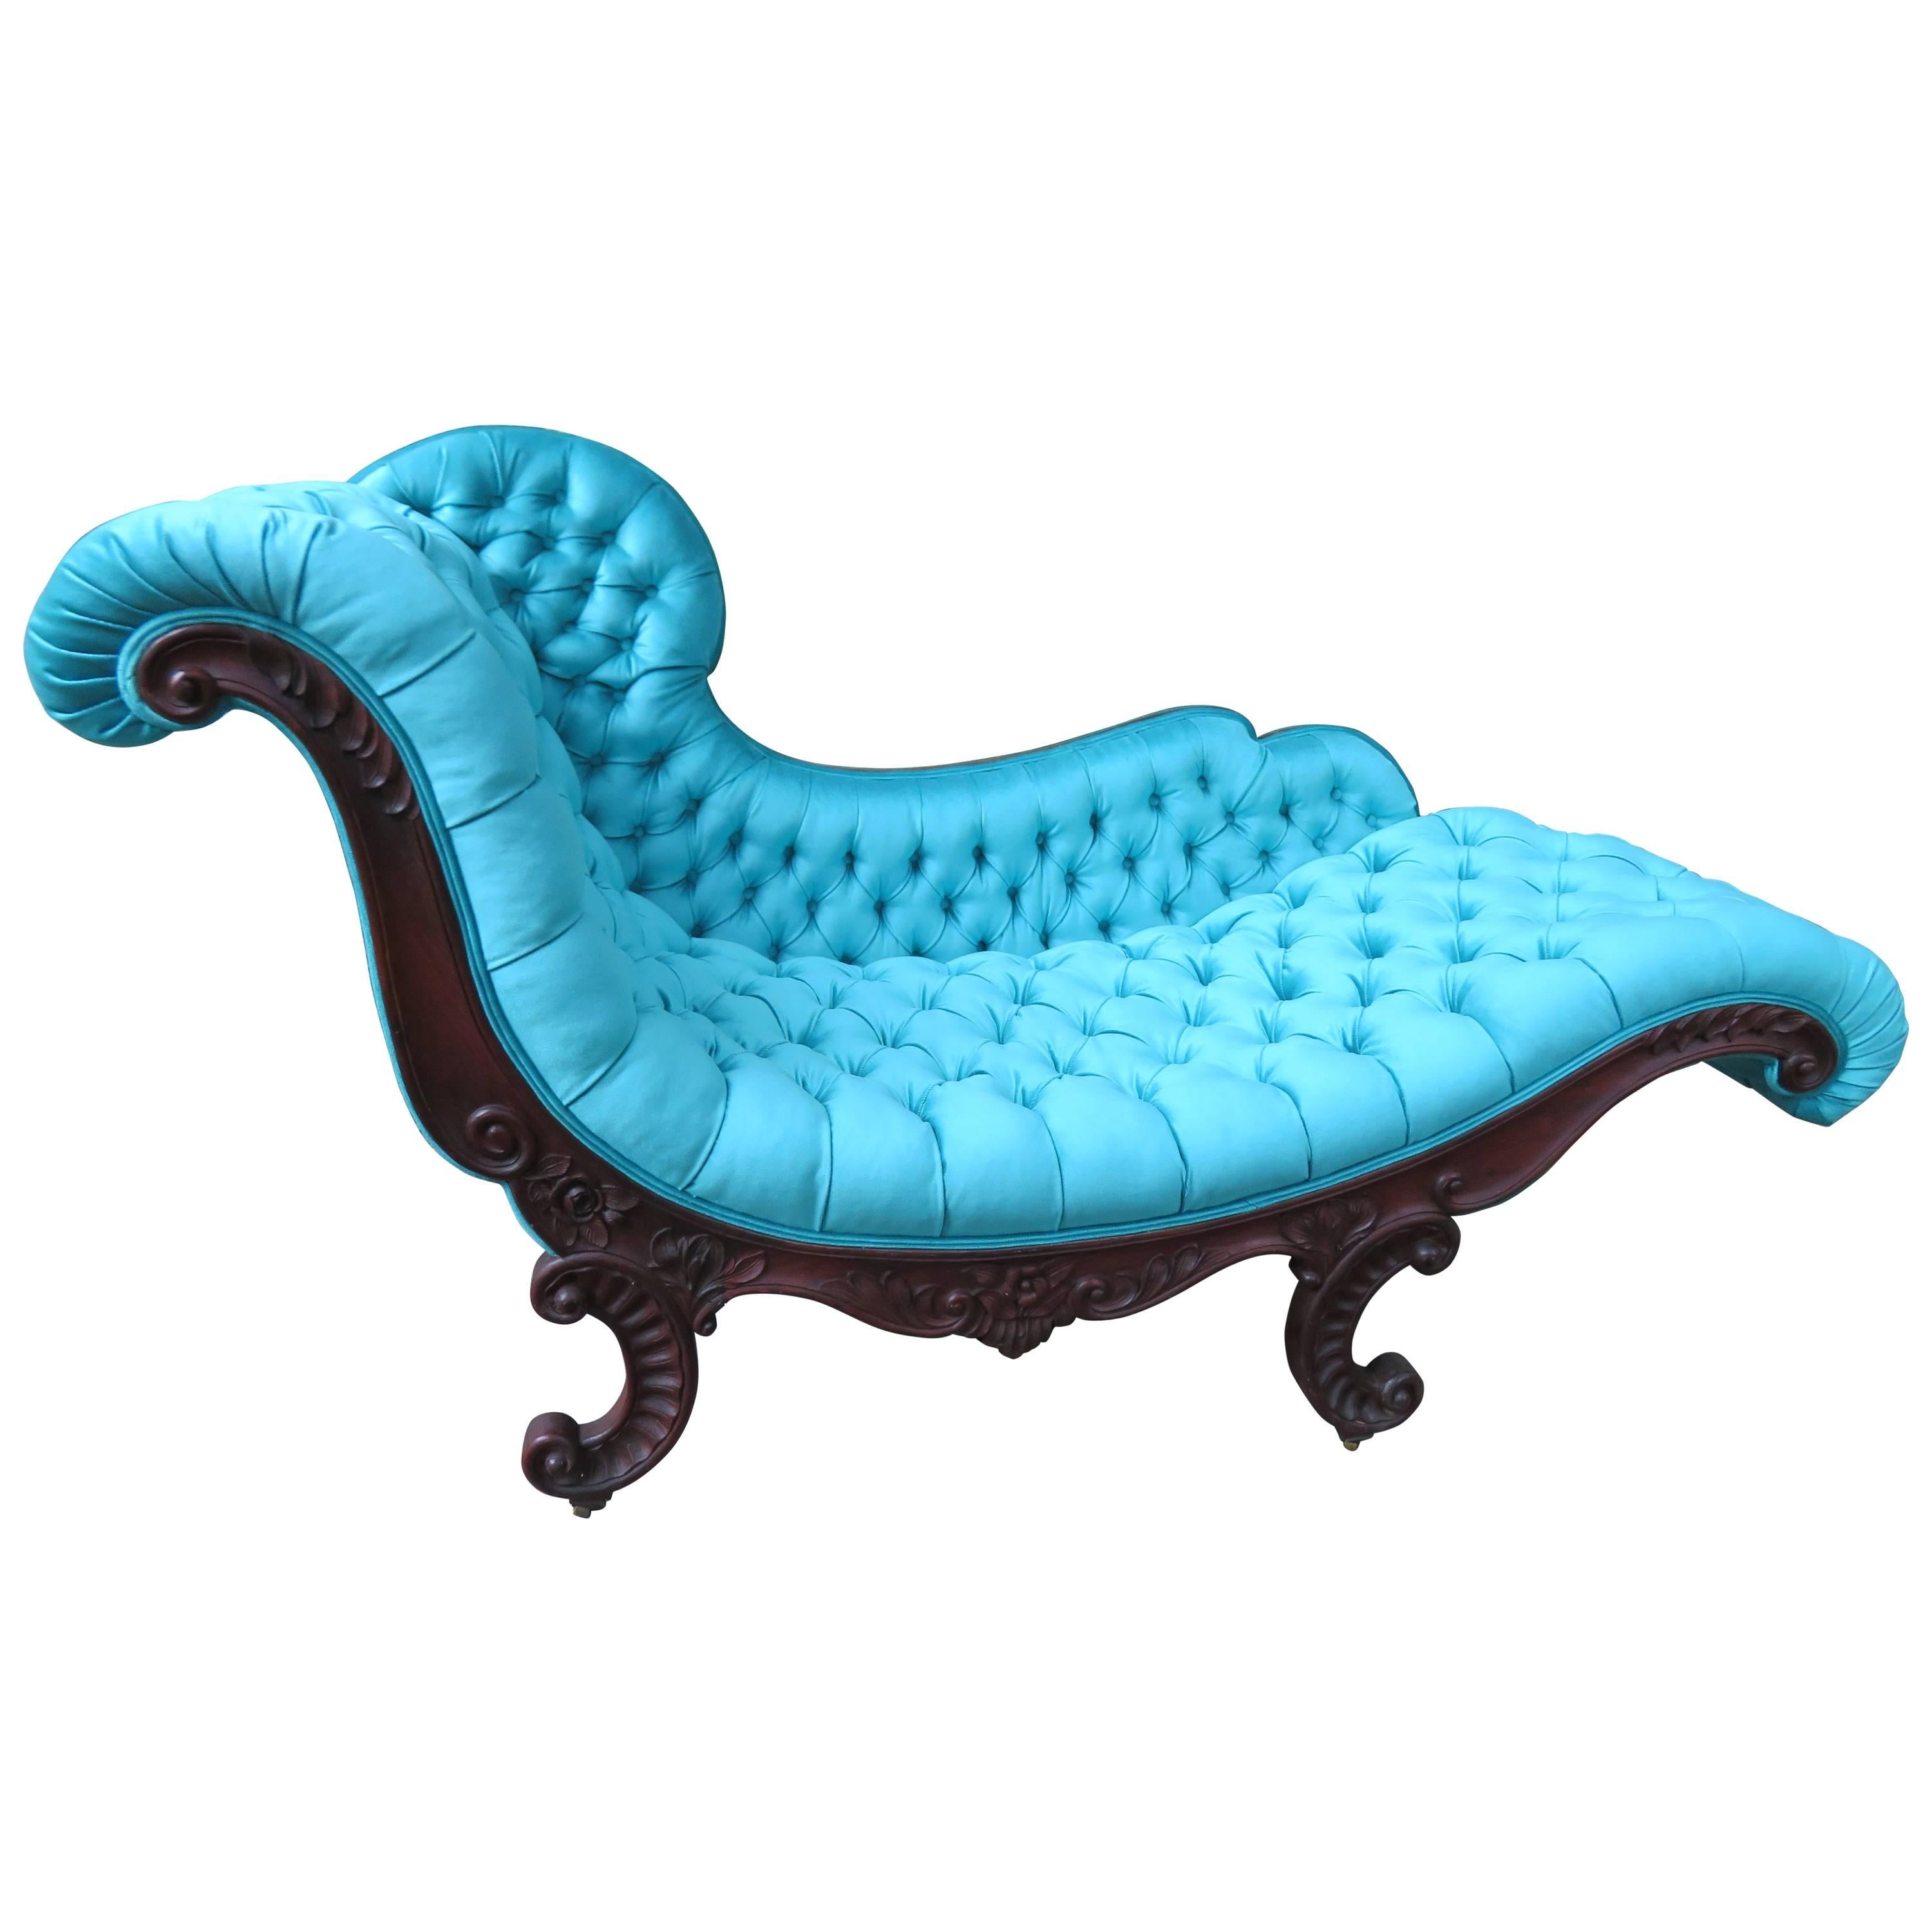 Magnificent Victorian John Henry Belter Attributed Rosewood Tufted Chaise Longue